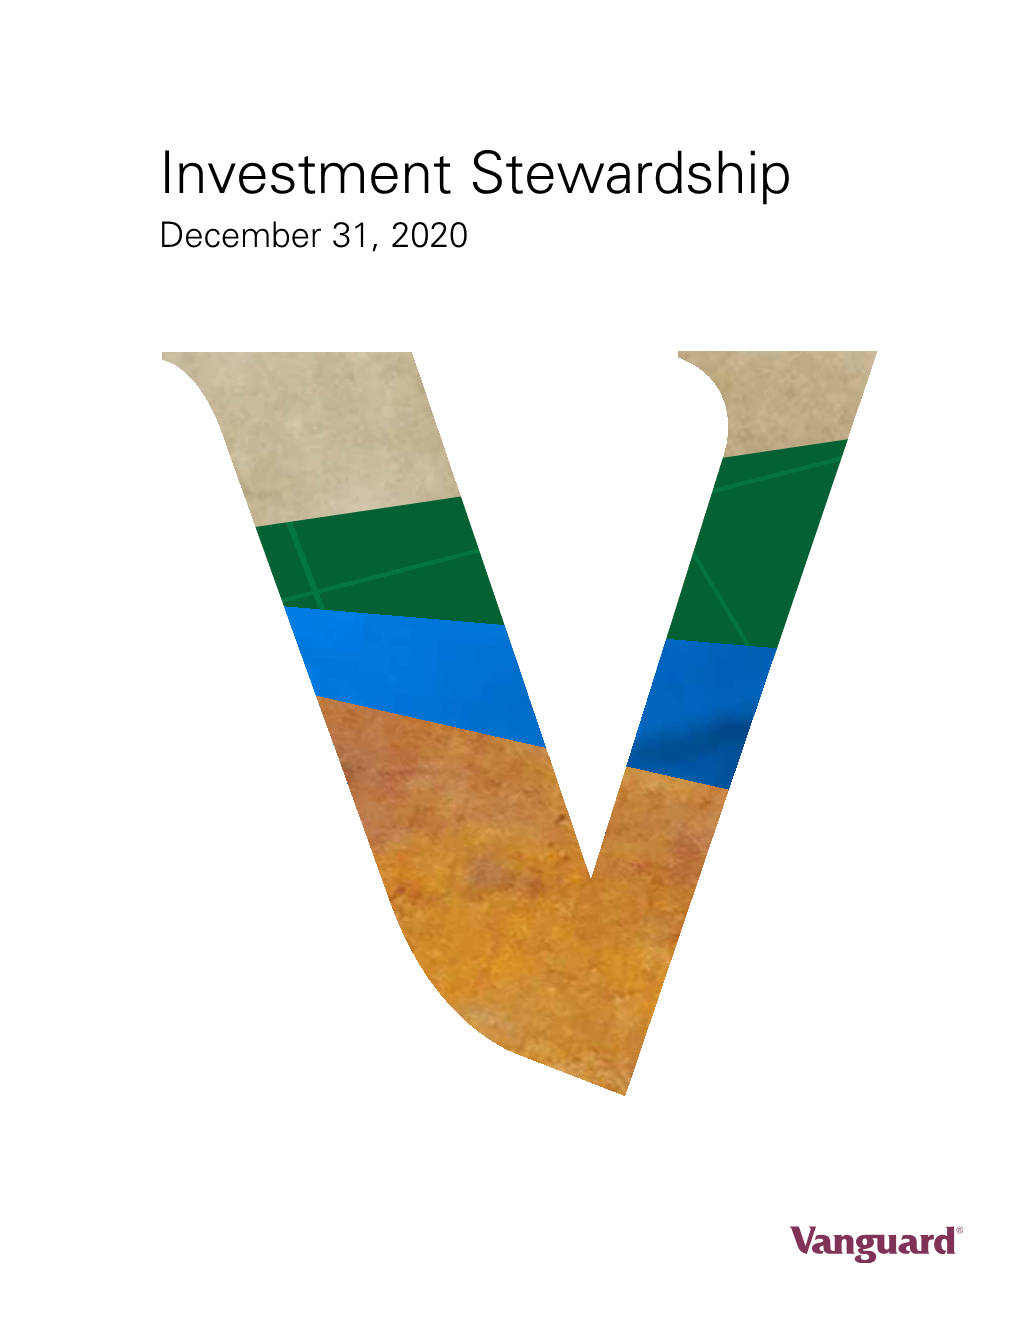 2020 Investment Stewardship Annual Report